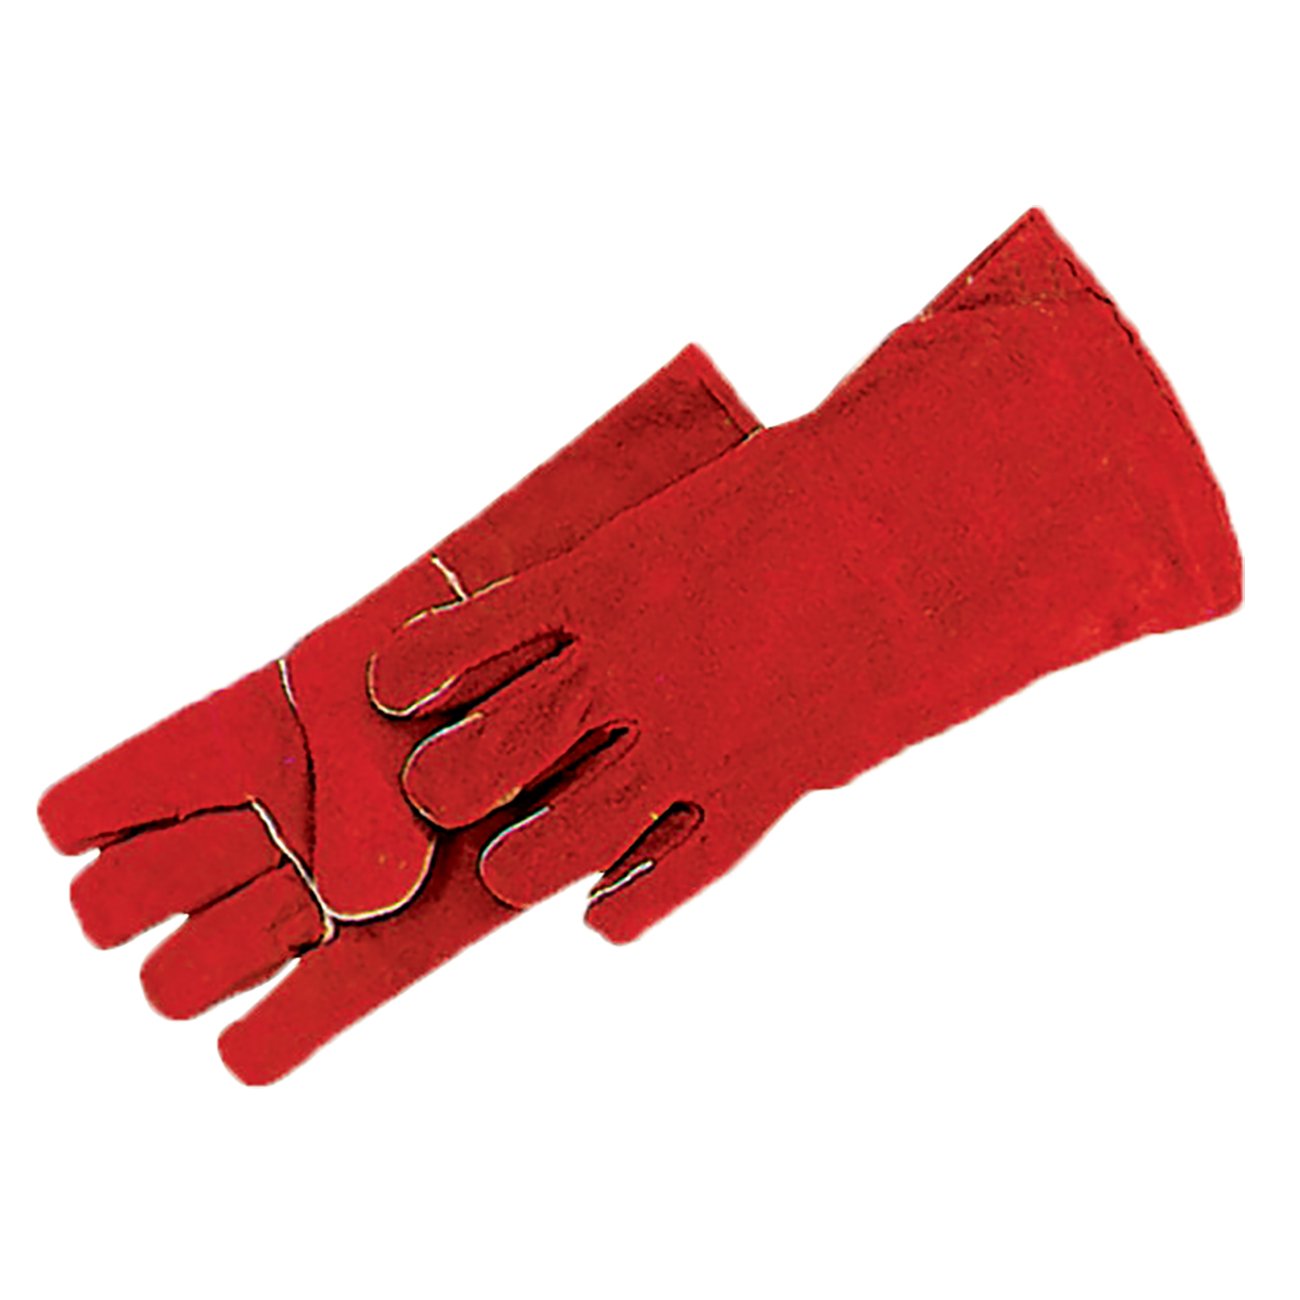 Ranpro 251 Coyote Light Duty Leather Welding Glove Personal Protective Equipment - Cleanflow